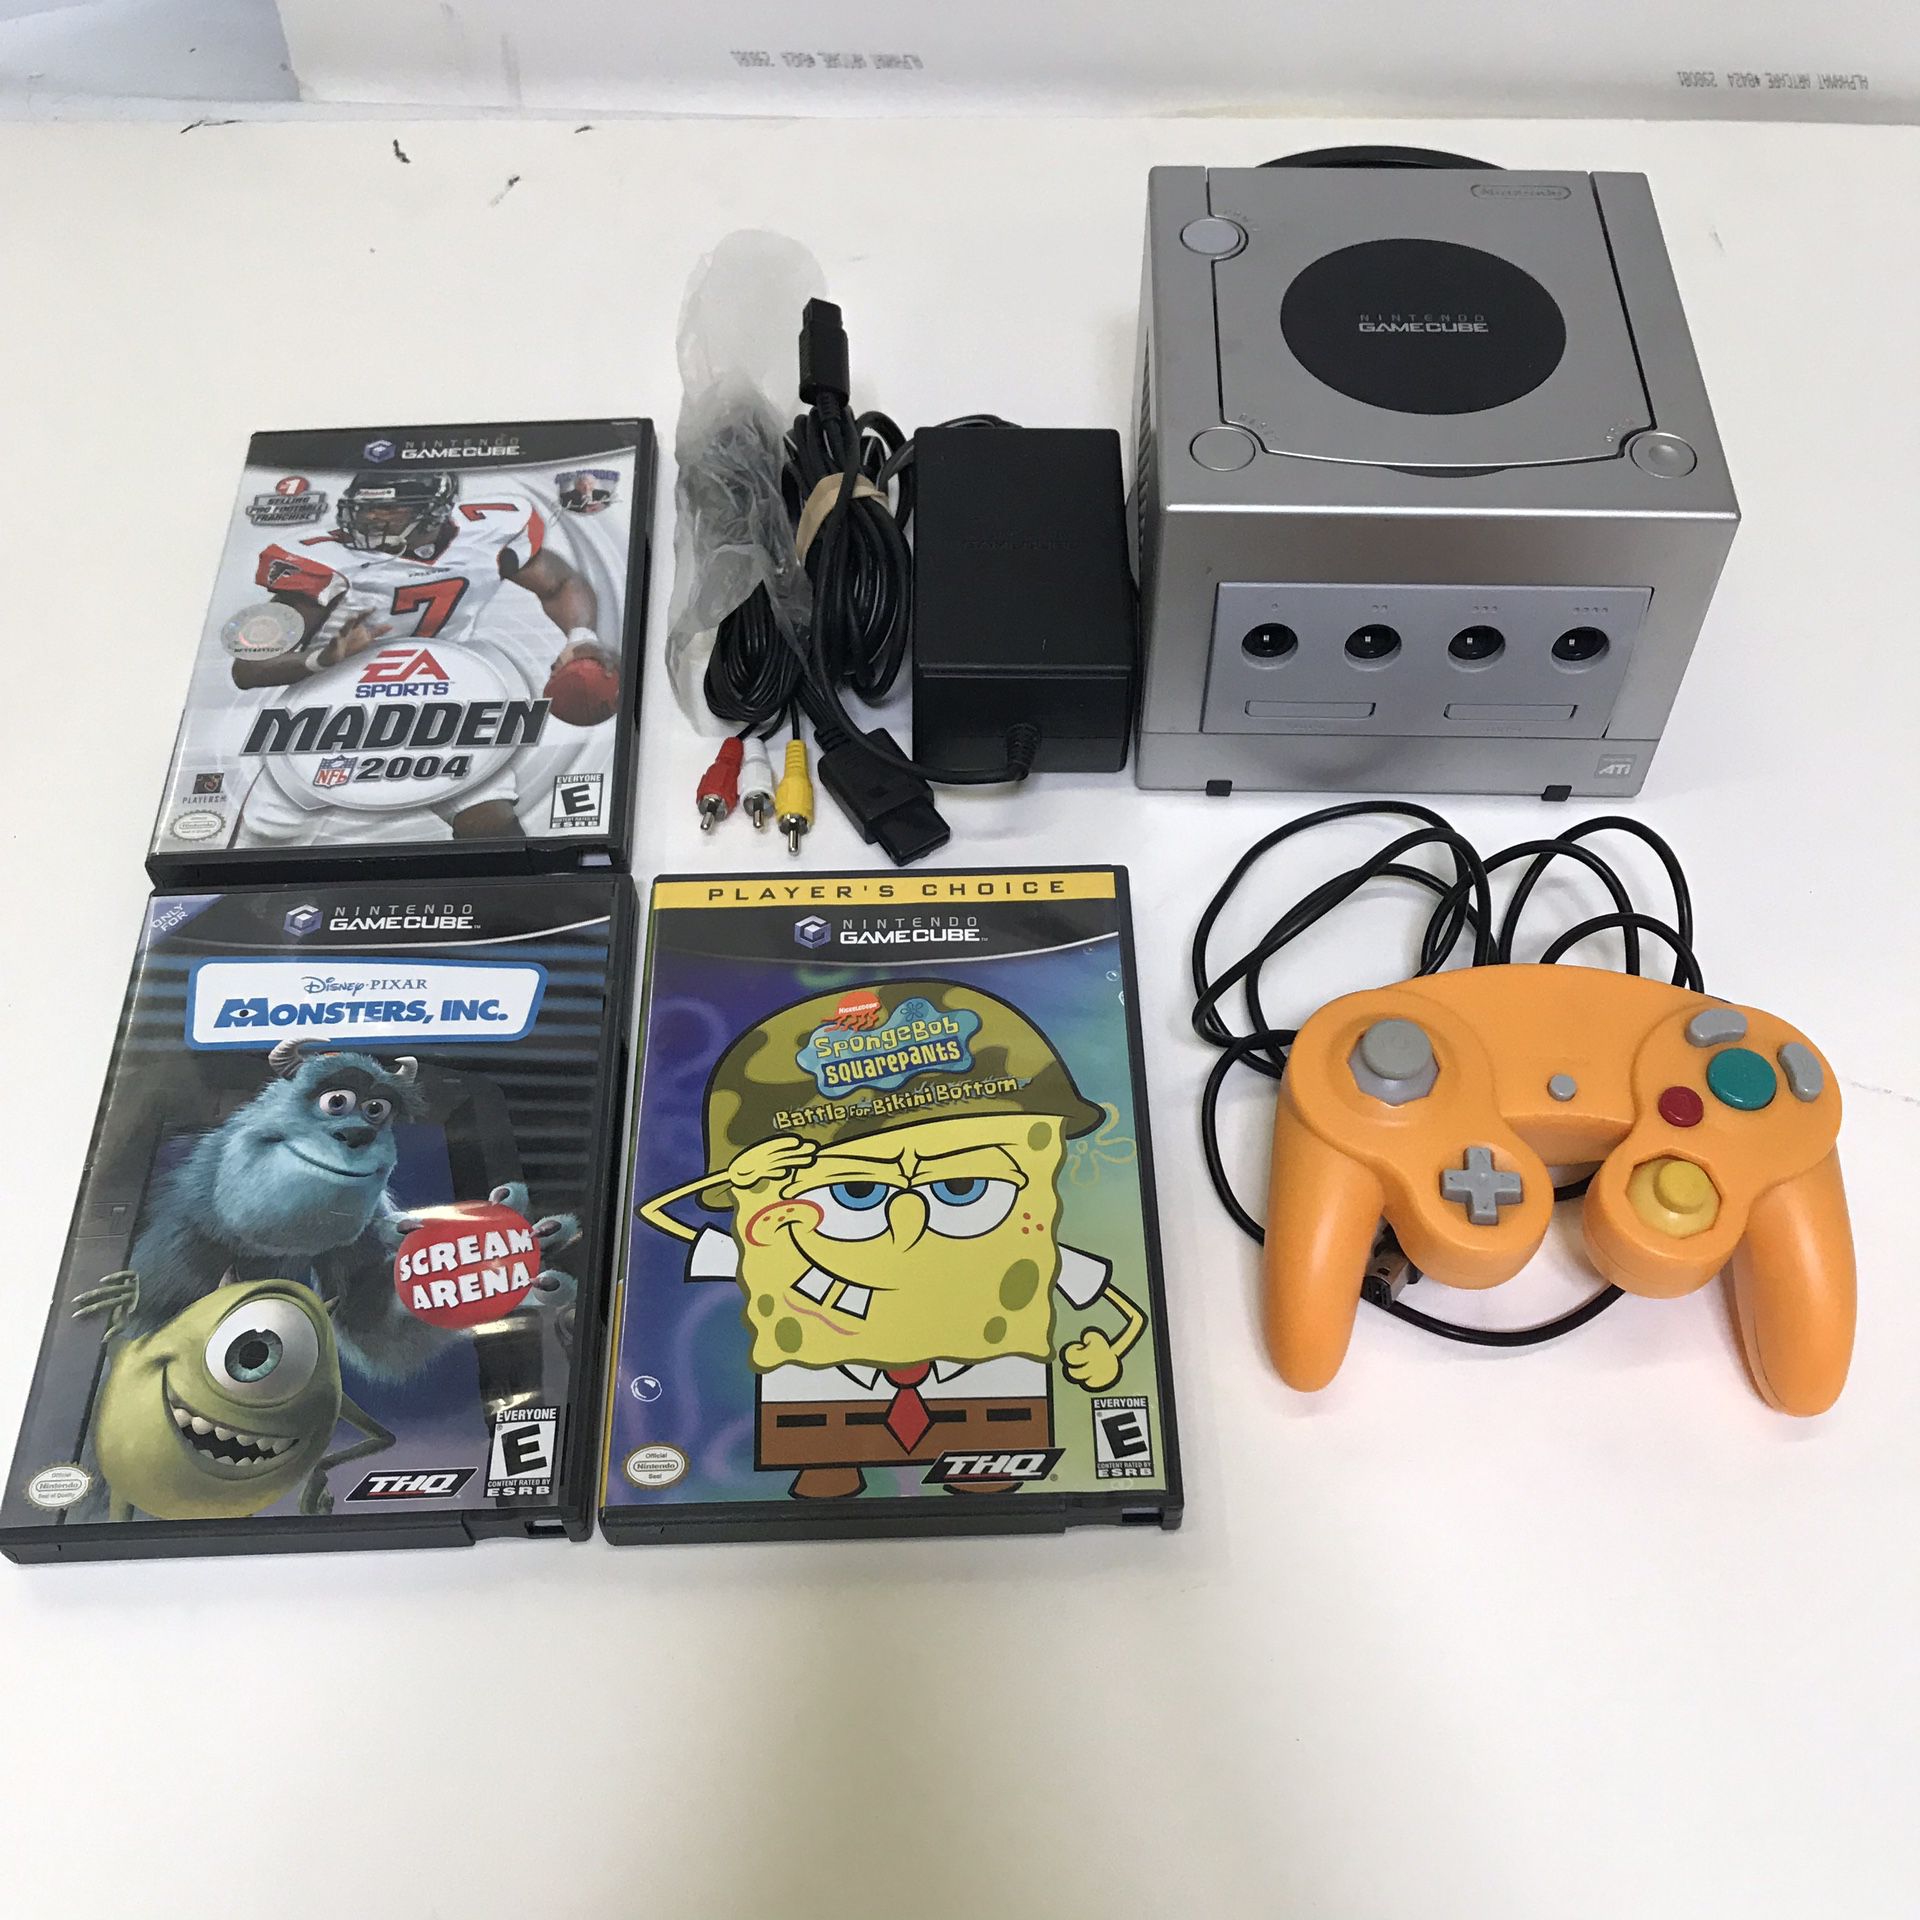 Silver Nintendo Gamecube system console with 3 games and controller